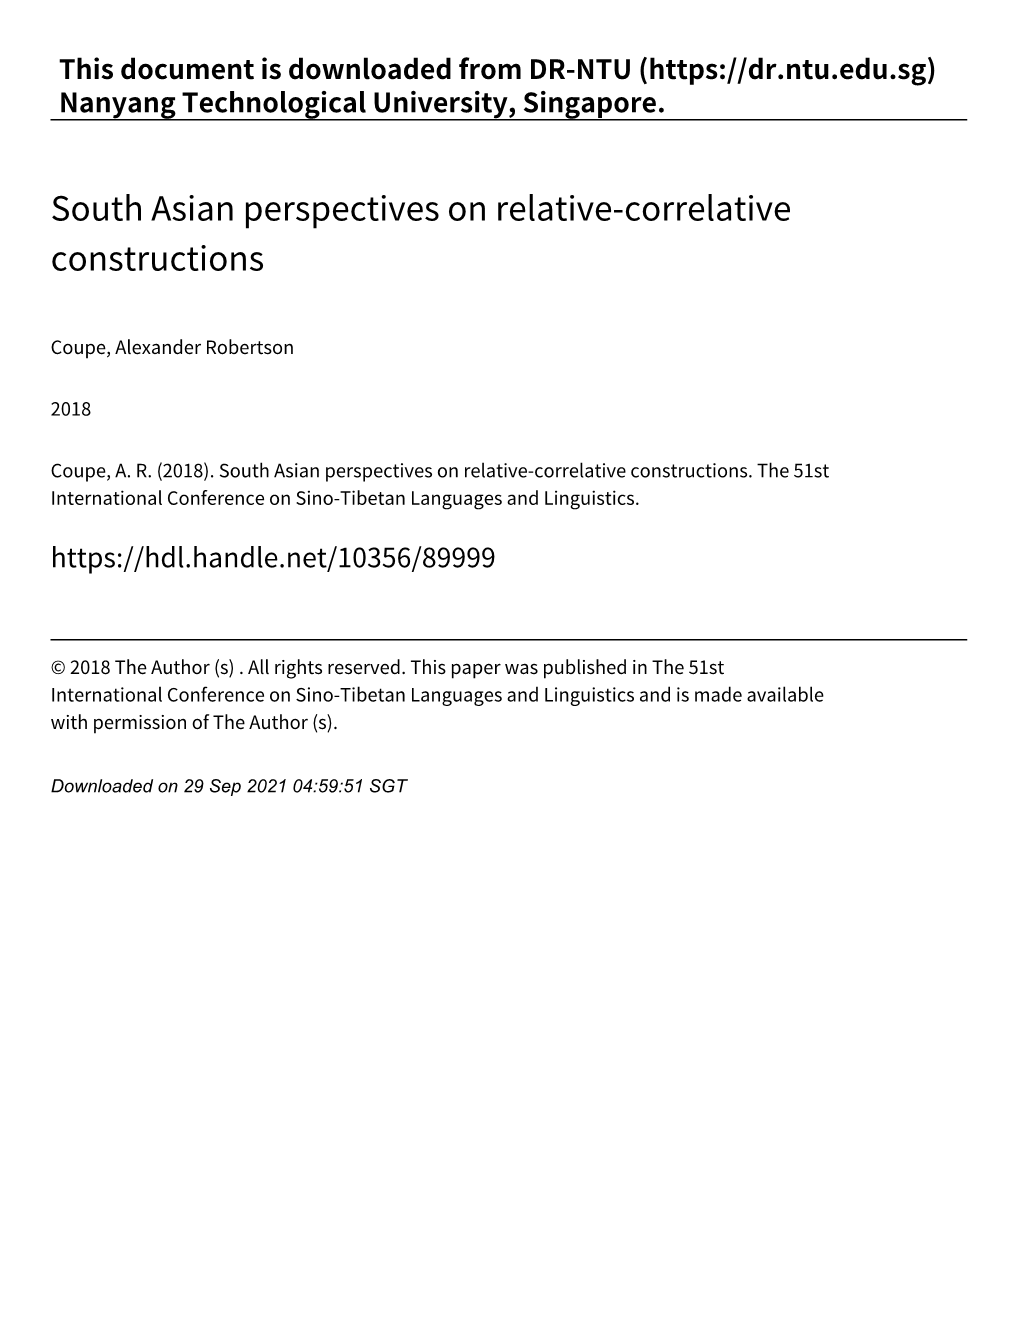 South Asian Perspectives on Relative‑Correlative Constructions